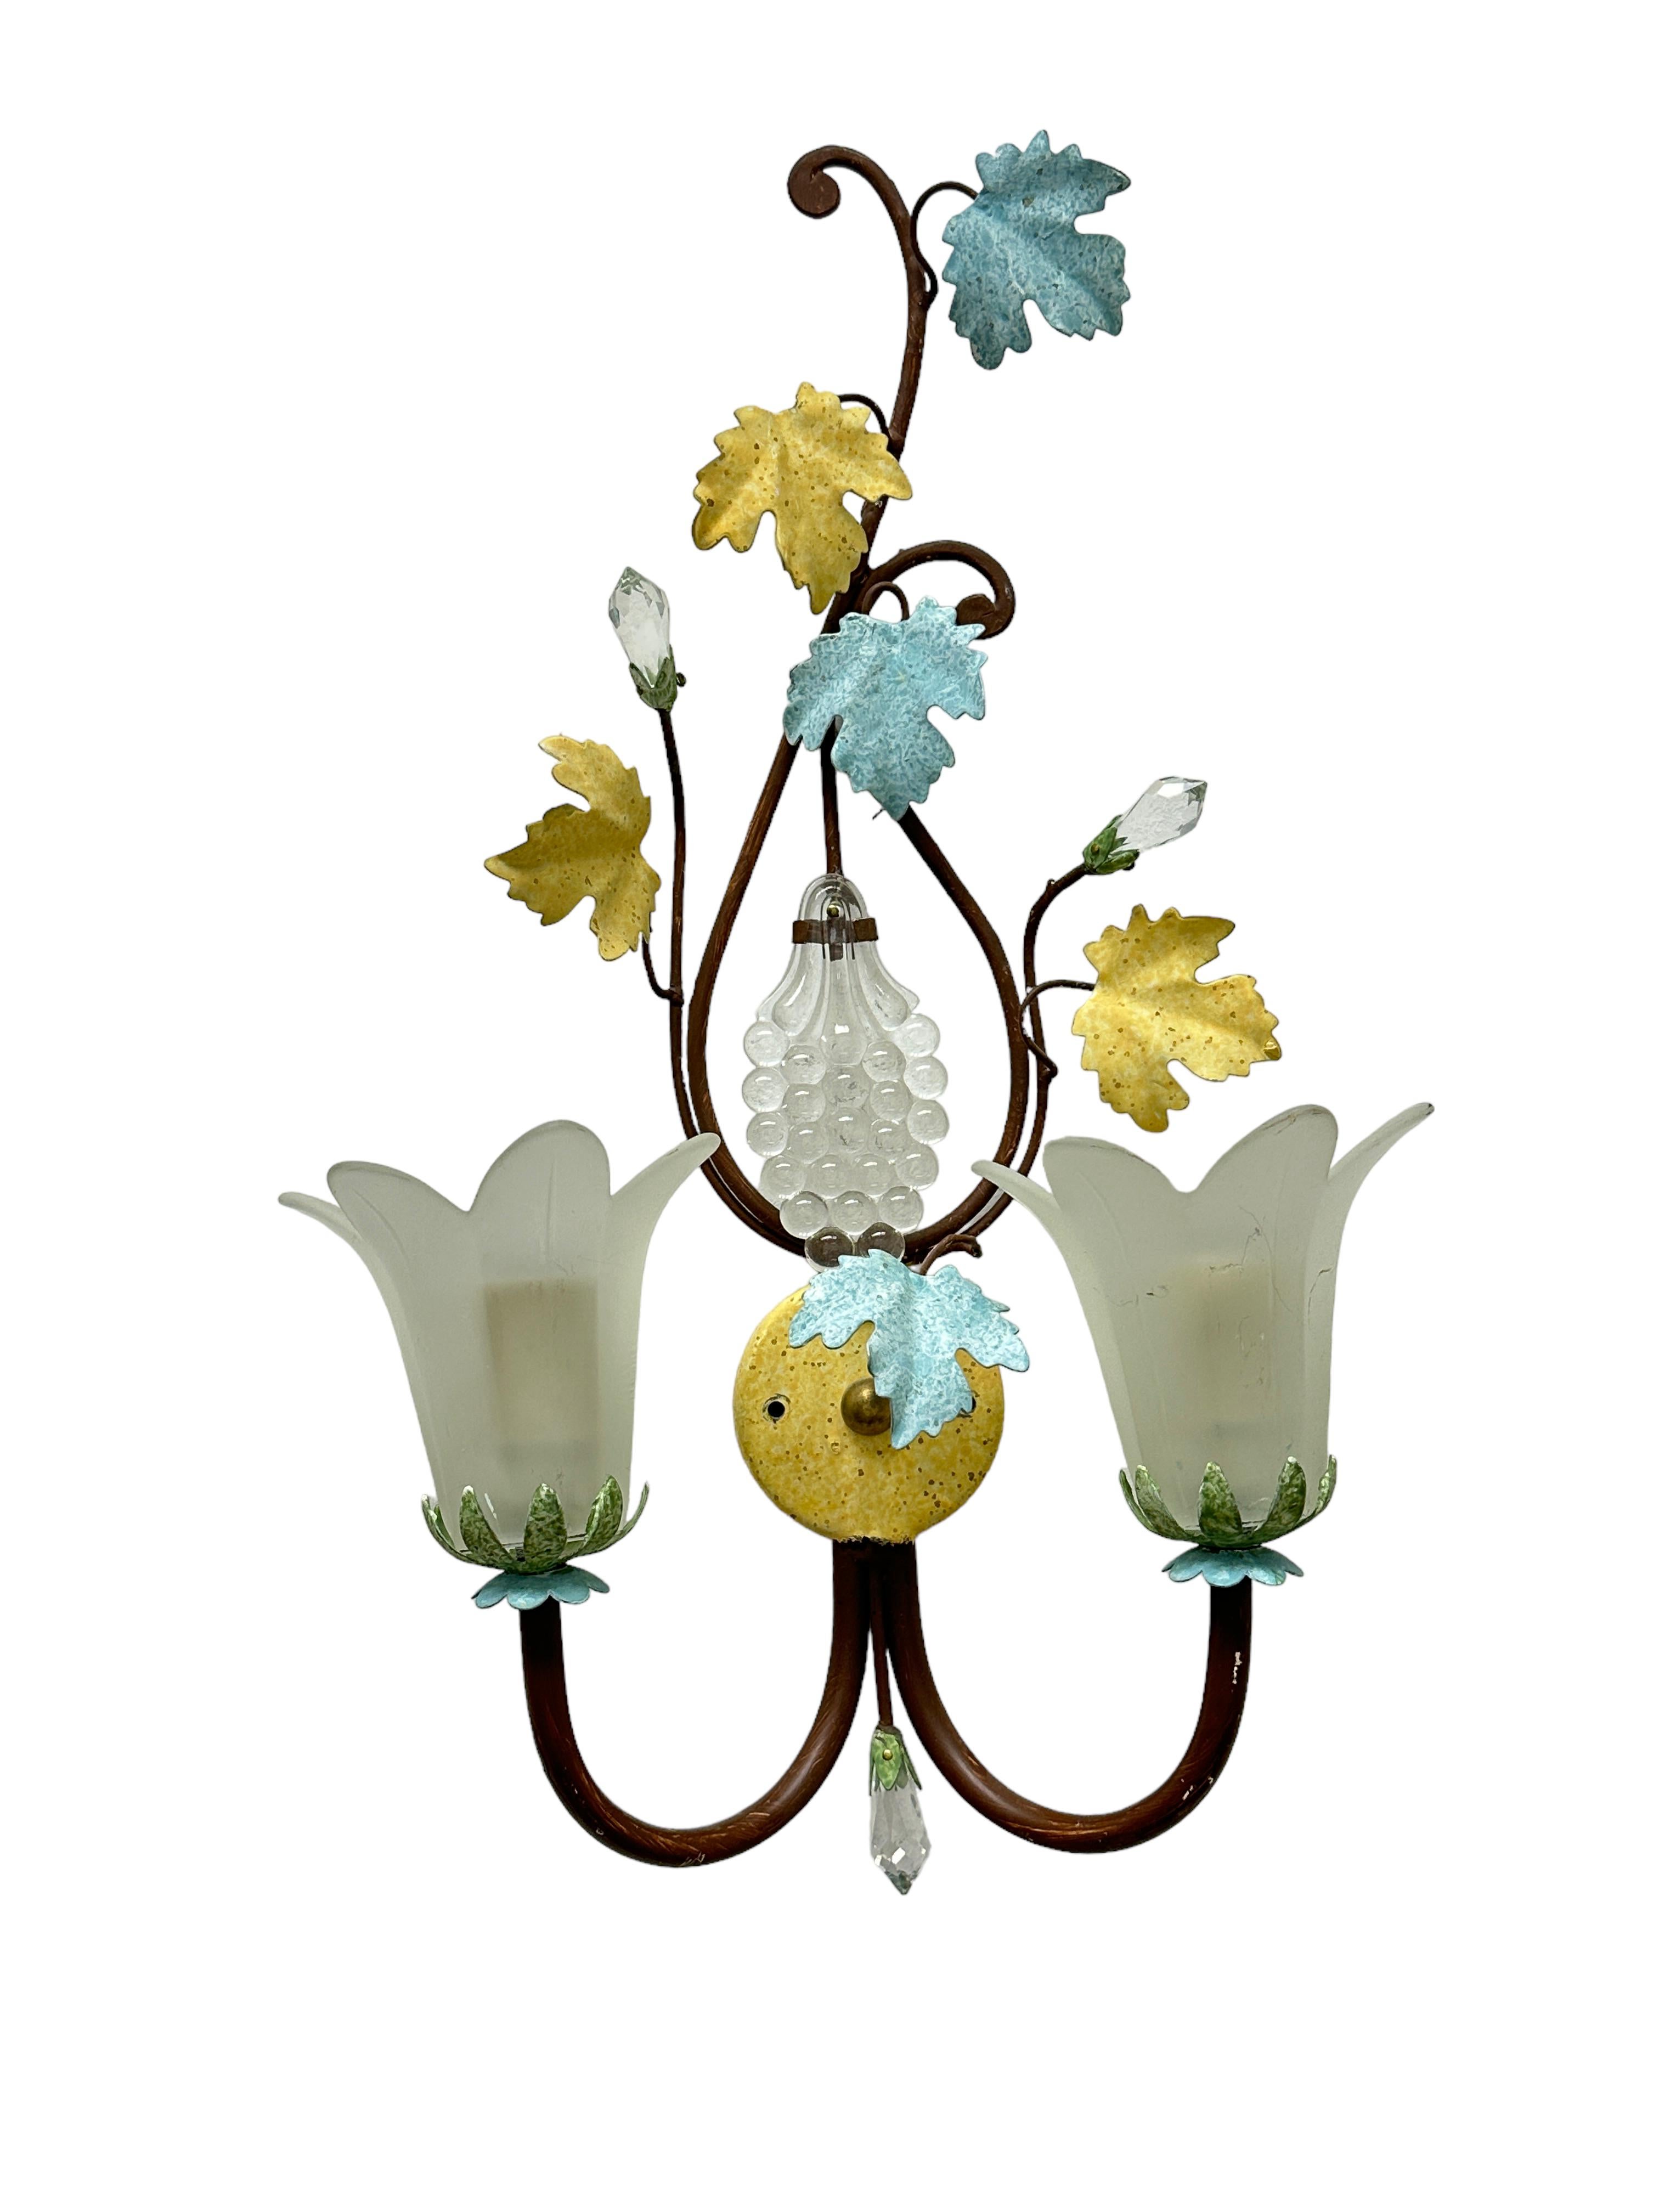 A pair iron floral sconces with crystal flowers and leaves. Each fixture requires two European E14 candelabra bulbs, each bulb up to 40 watts. The wall light has a beautiful patina and gives each room an eclectic statement. Made of metal and crystal